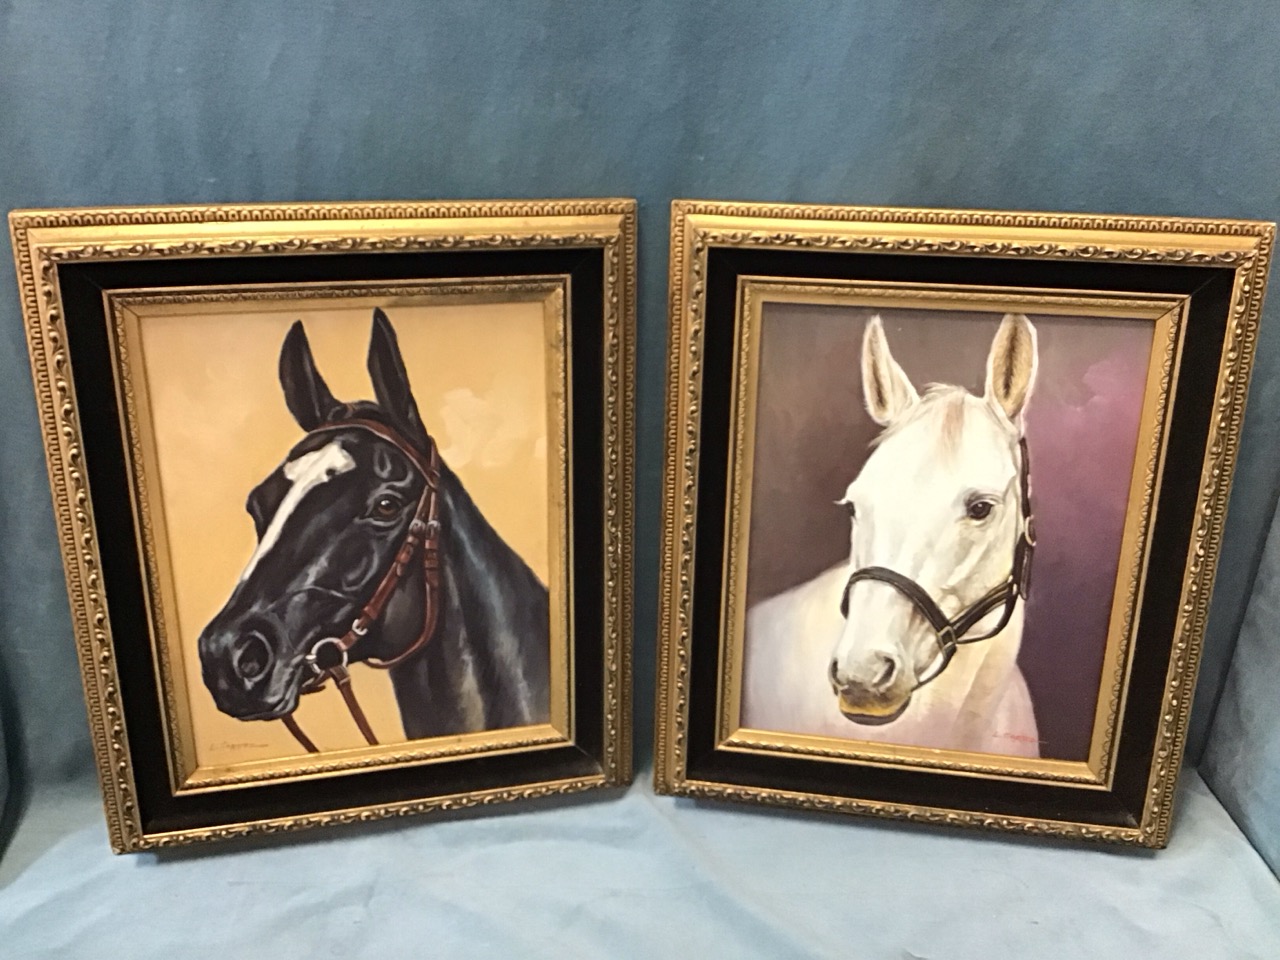 L Cortez, oils on canvas laid on board, horse portraits, a black with white star & stripe, and a